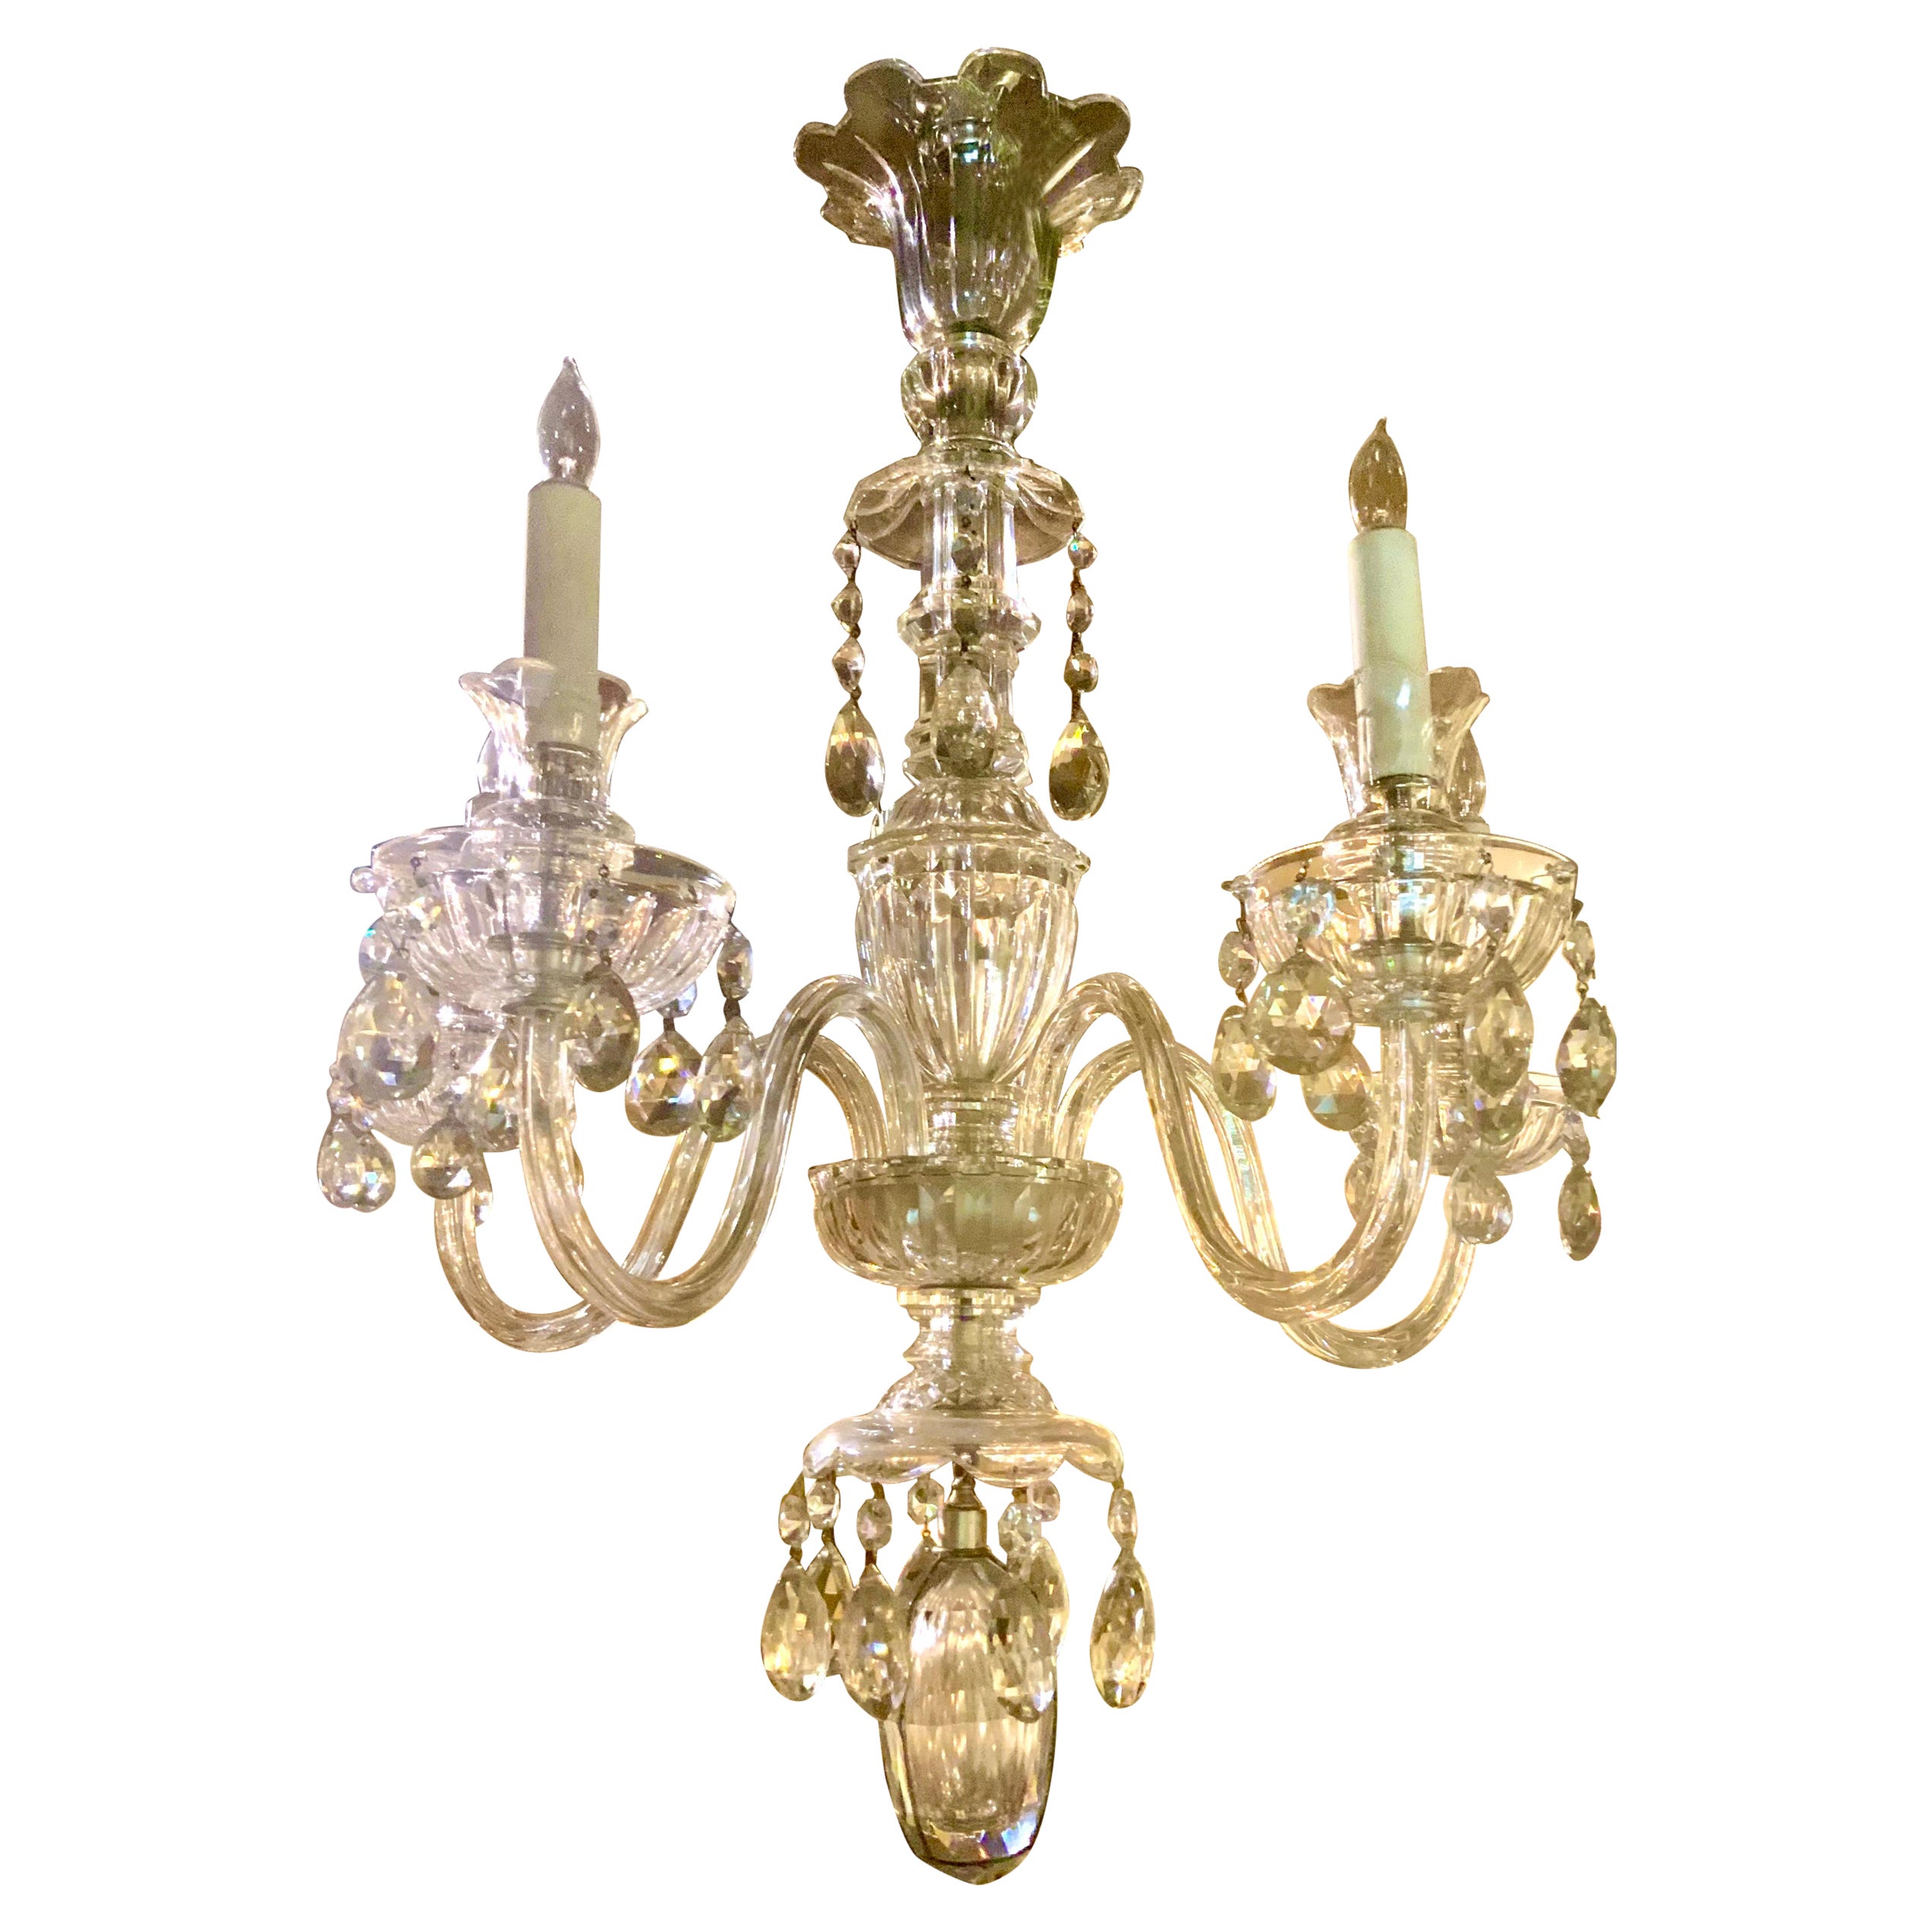 English all crystal chandelier, 19 th century